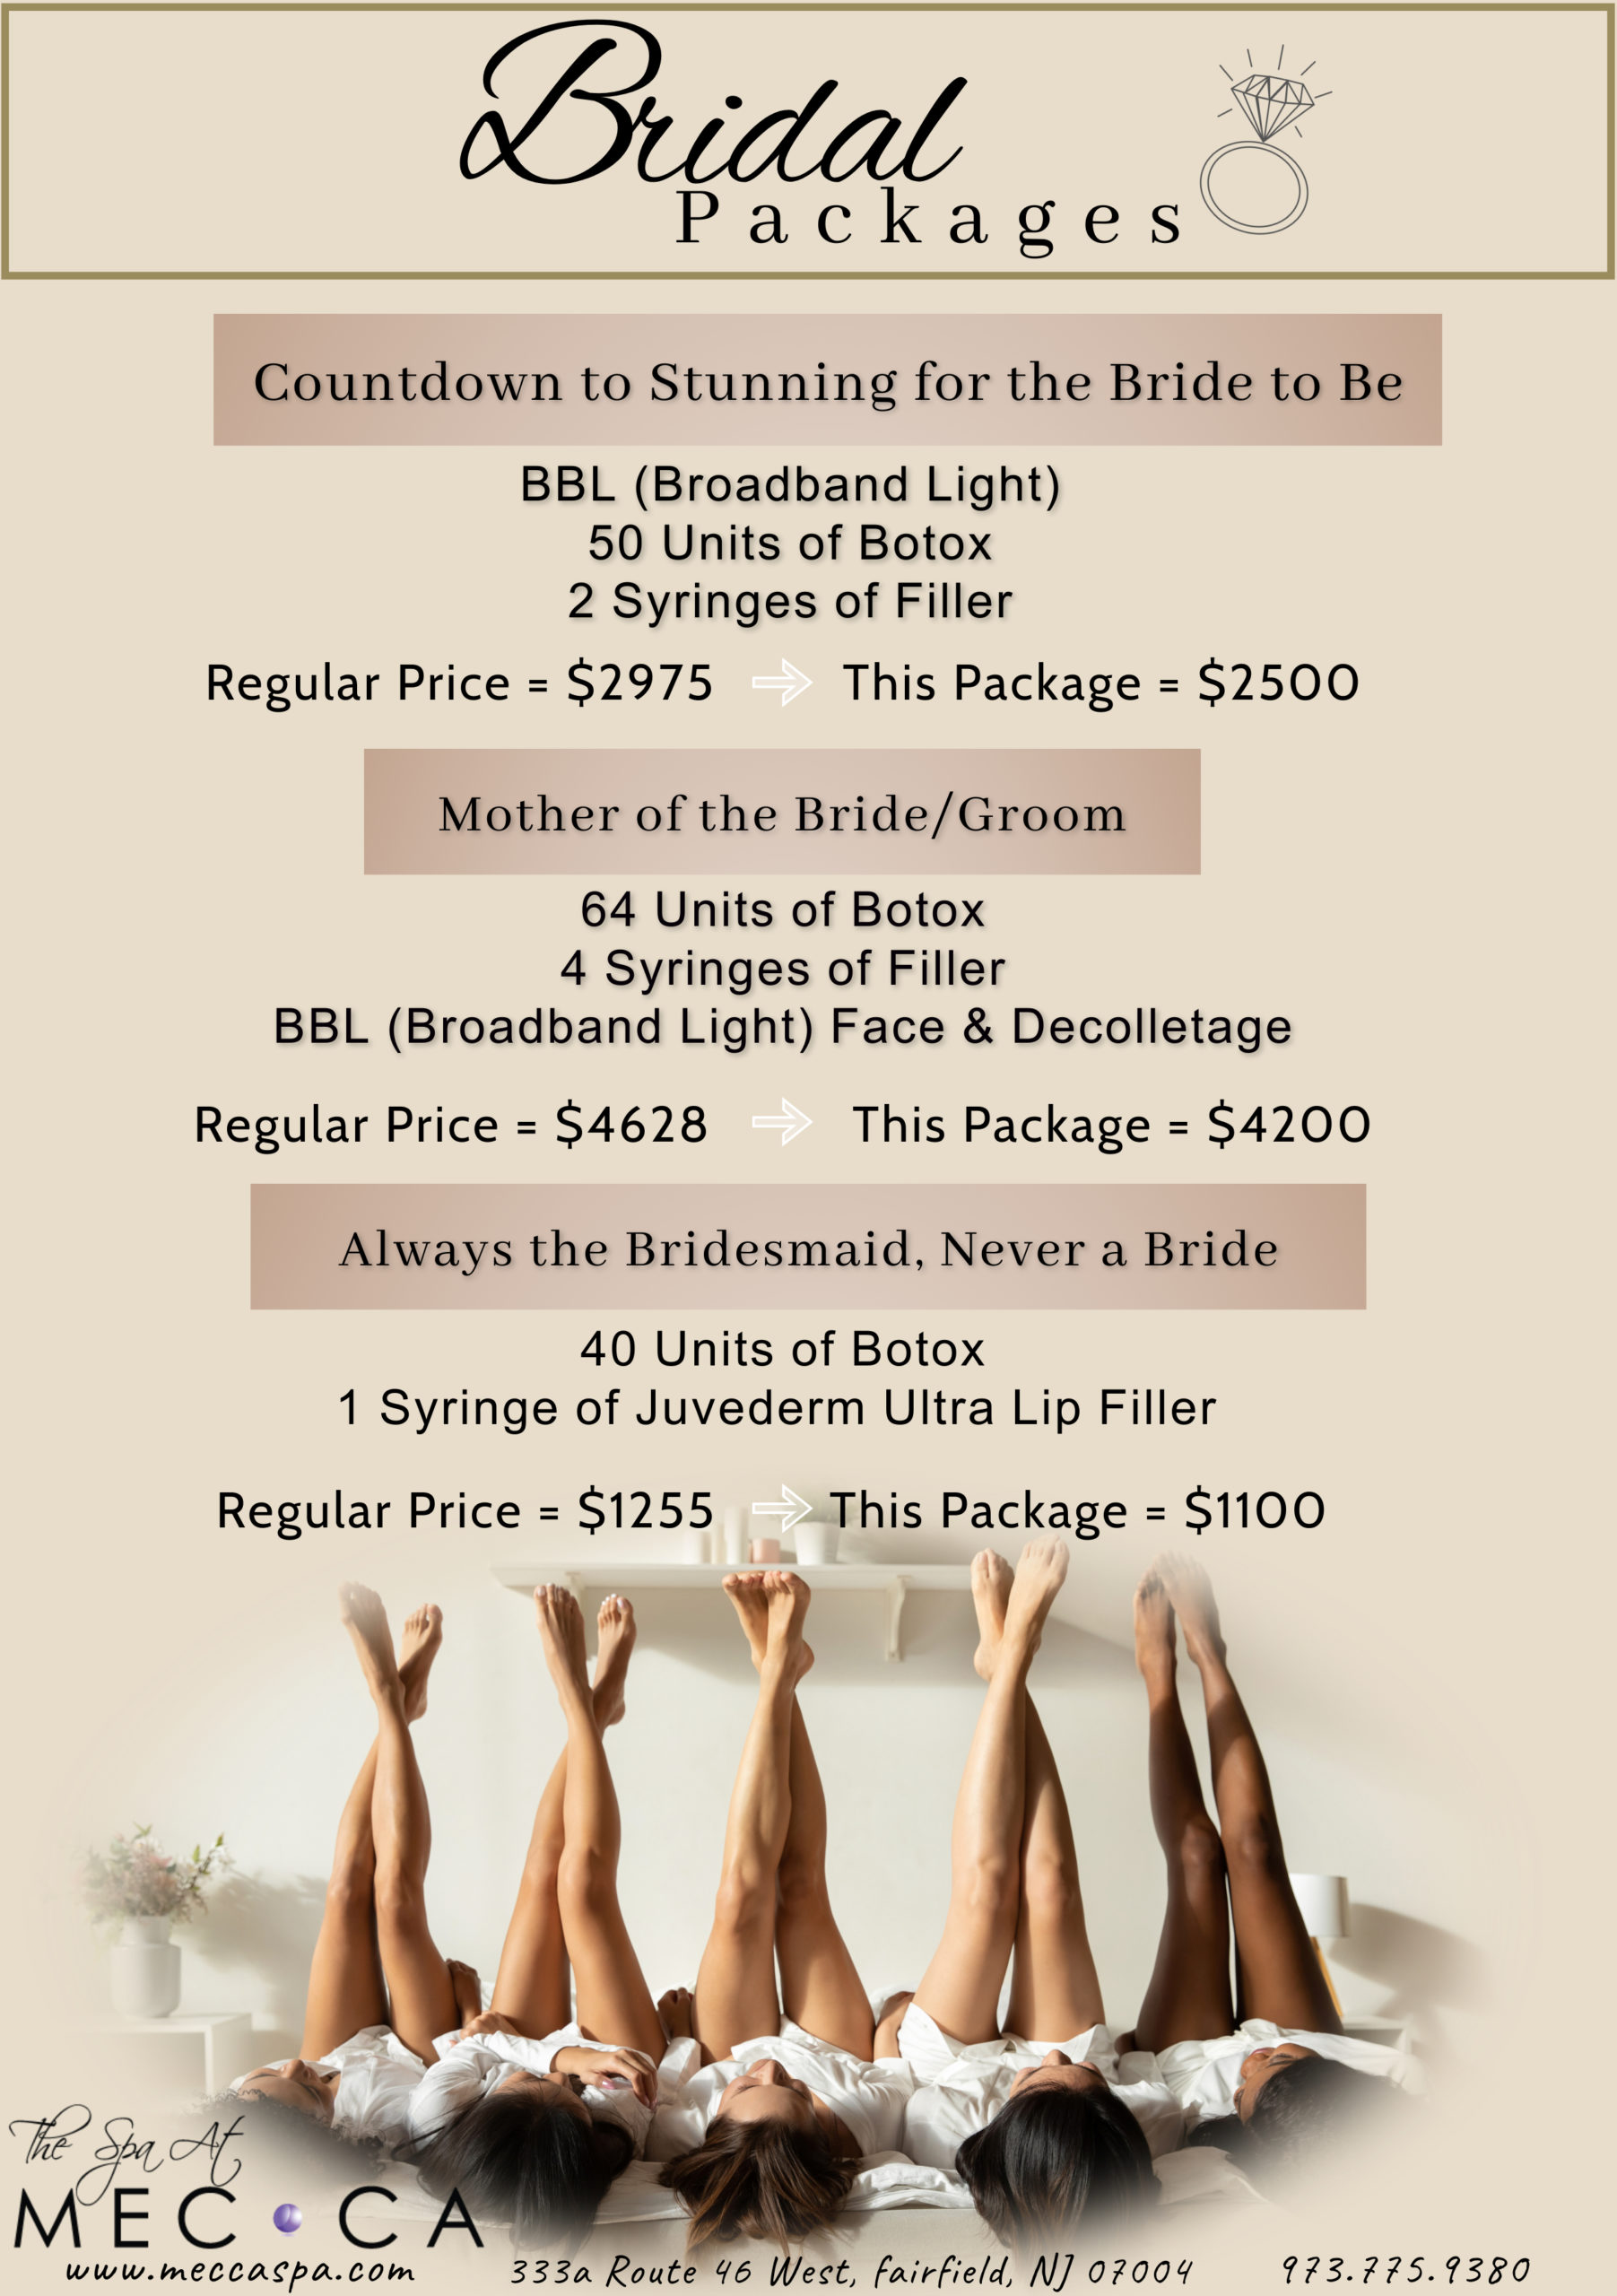 Bridal Packages (1)